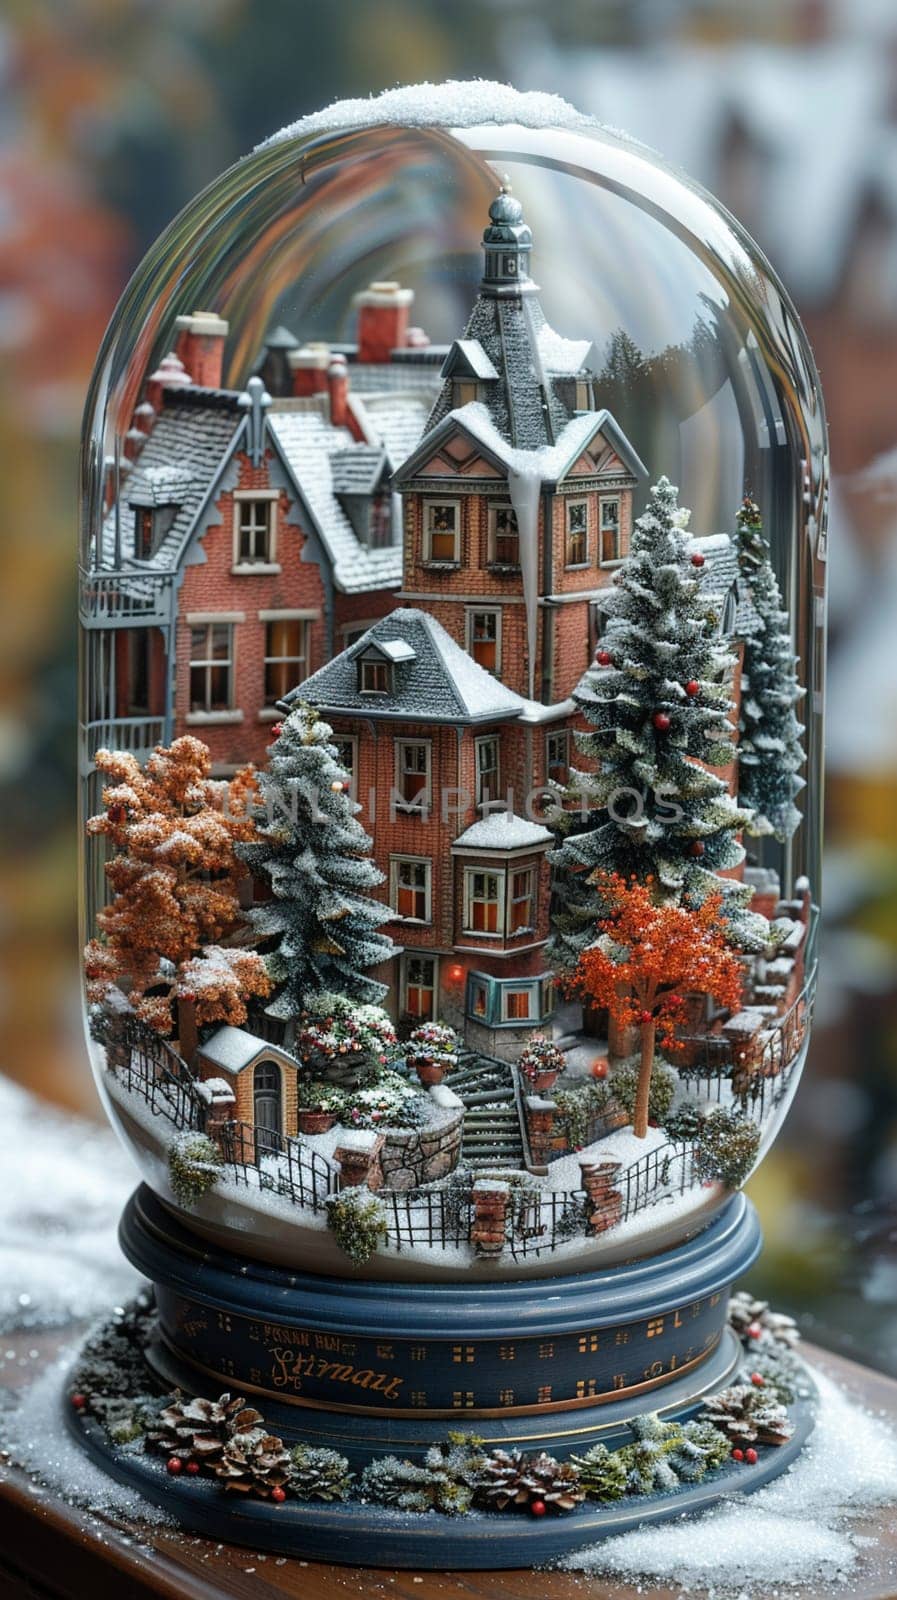 City life in a snow globe rendered with a whimsical, charming style, turning urban scenes into miniature wonders.